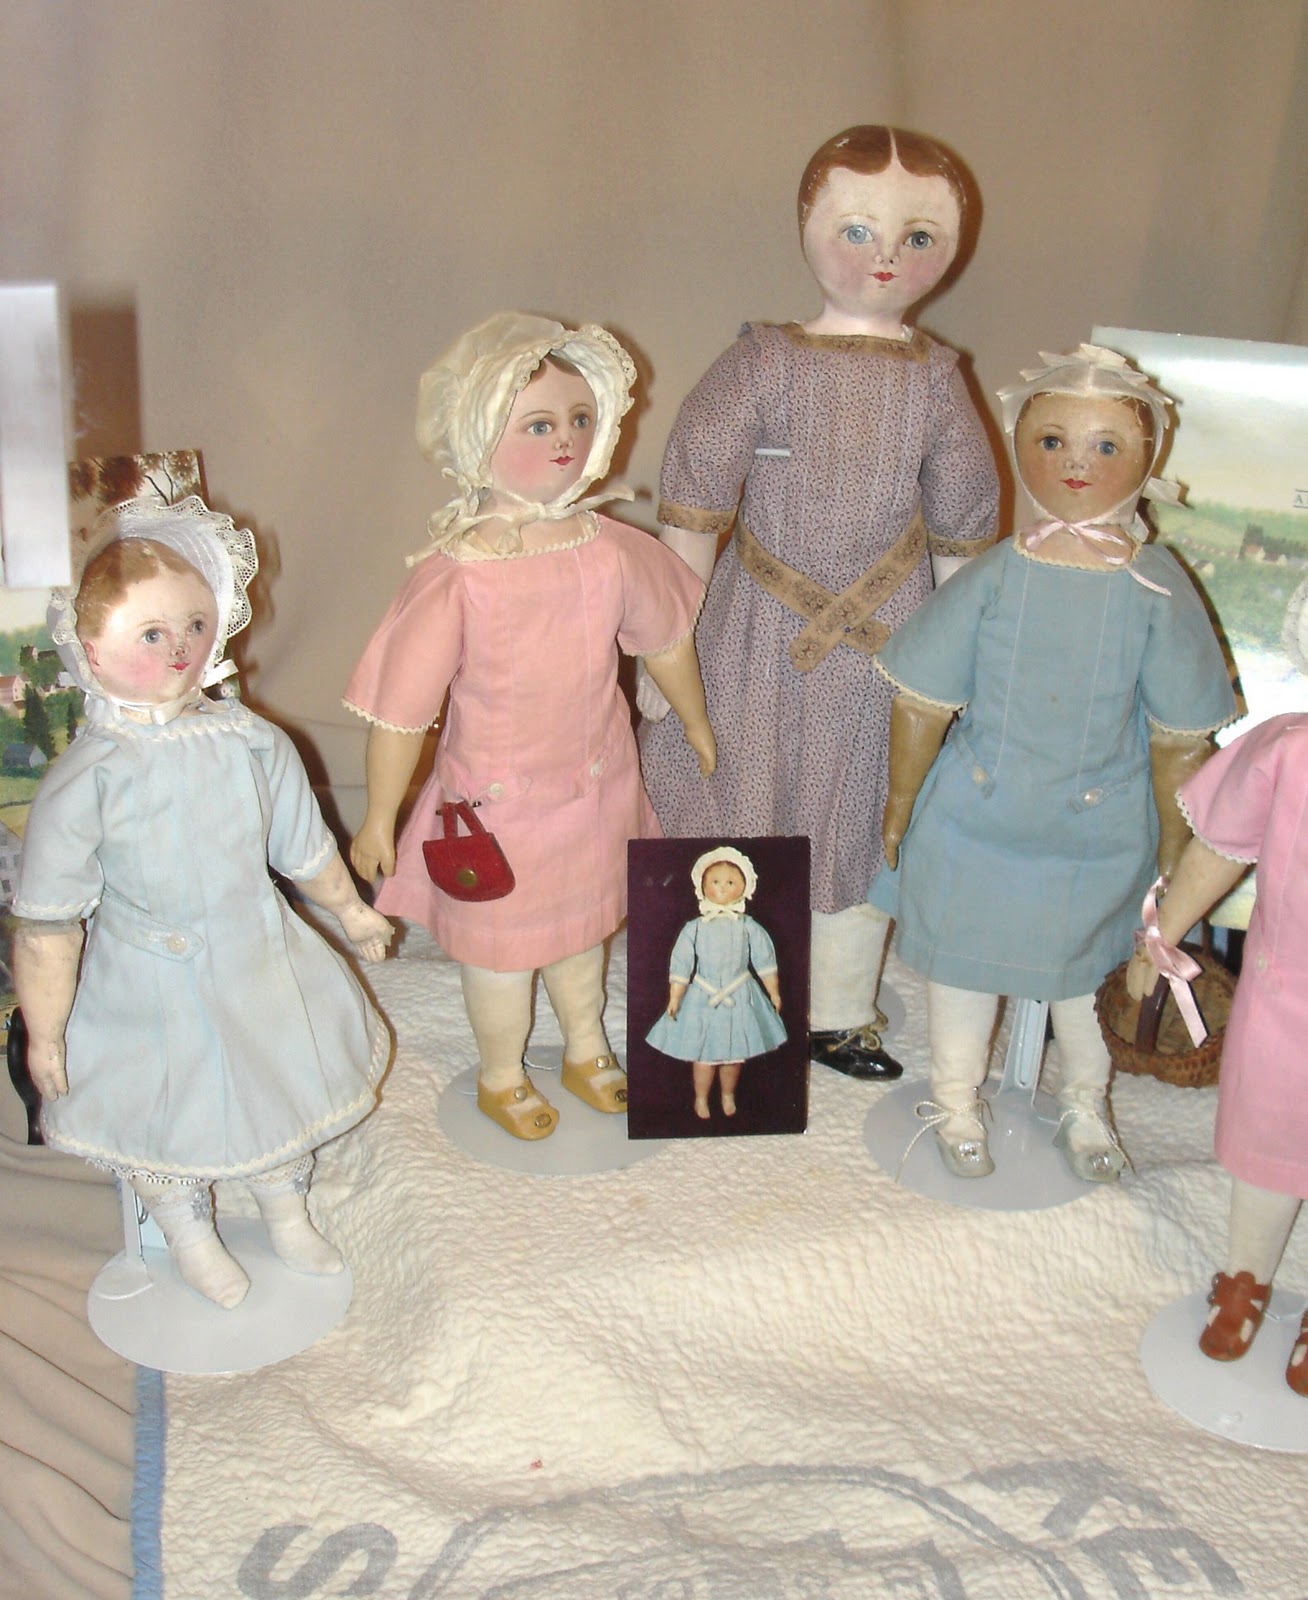 Buy the Vintage Large 21in Real Seeley Doll Body For Doll Making